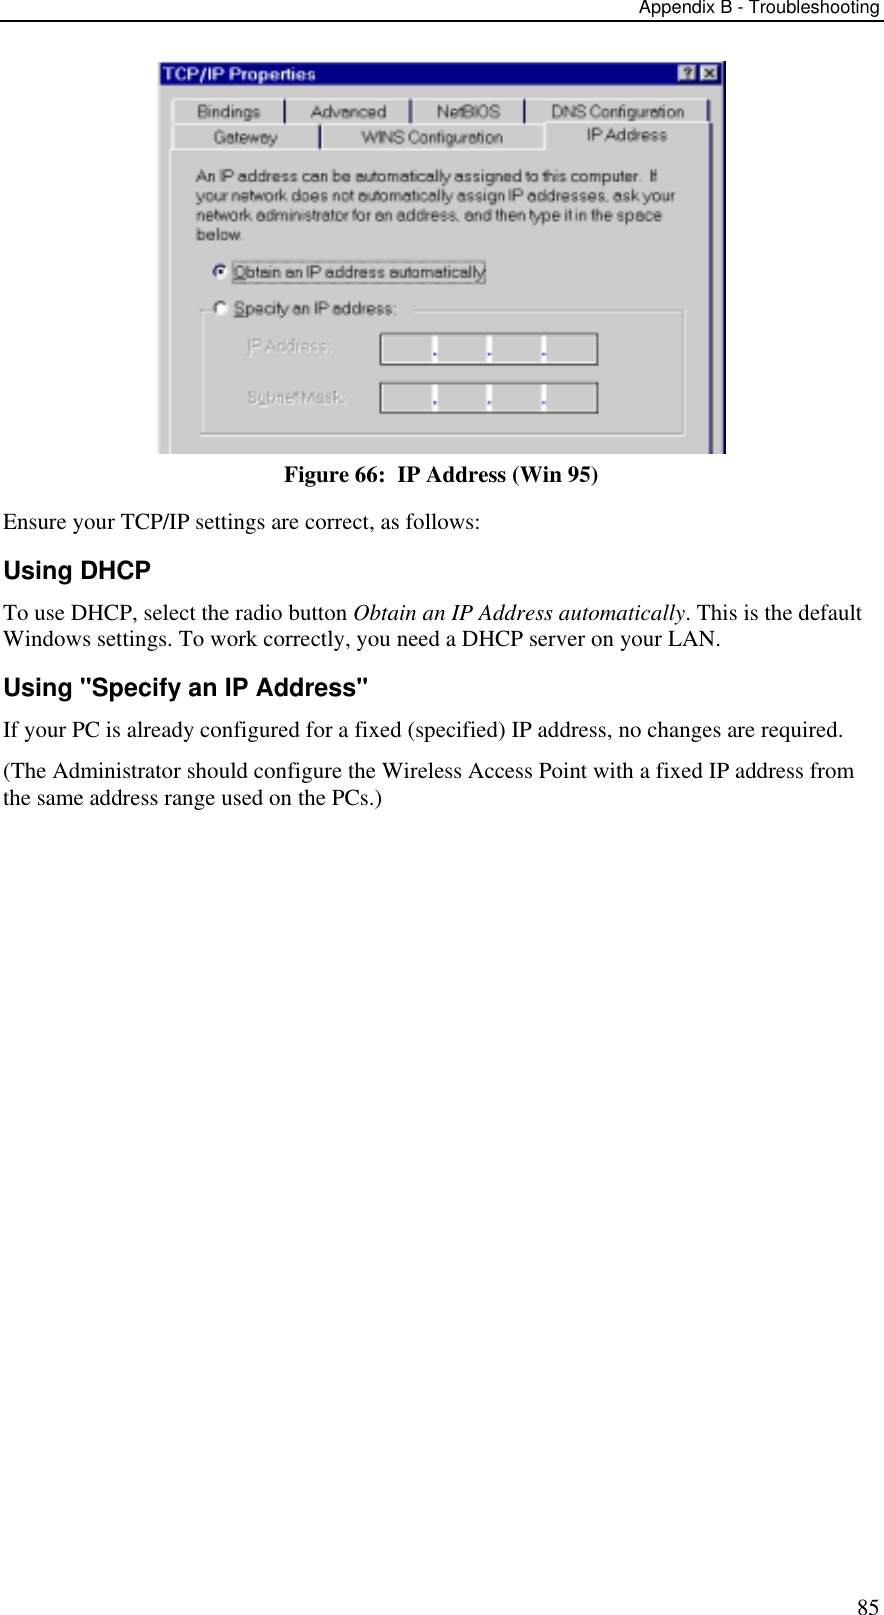 Appendix B - Troubleshooting 85  Figure 66:  IP Address (Win 95) Ensure your TCP/IP settings are correct, as follows: Using DHCP To use DHCP, select the radio button Obtain an IP Address automatically. This is the default Windows settings. To work correctly, you need a DHCP server on your LAN. Using &quot;Specify an IP Address&quot; If your PC is already configured for a fixed (specified) IP address, no changes are required. (The Administrator should configure the Wireless Access Point with a fixed IP address from the same address range used on the PCs.) 